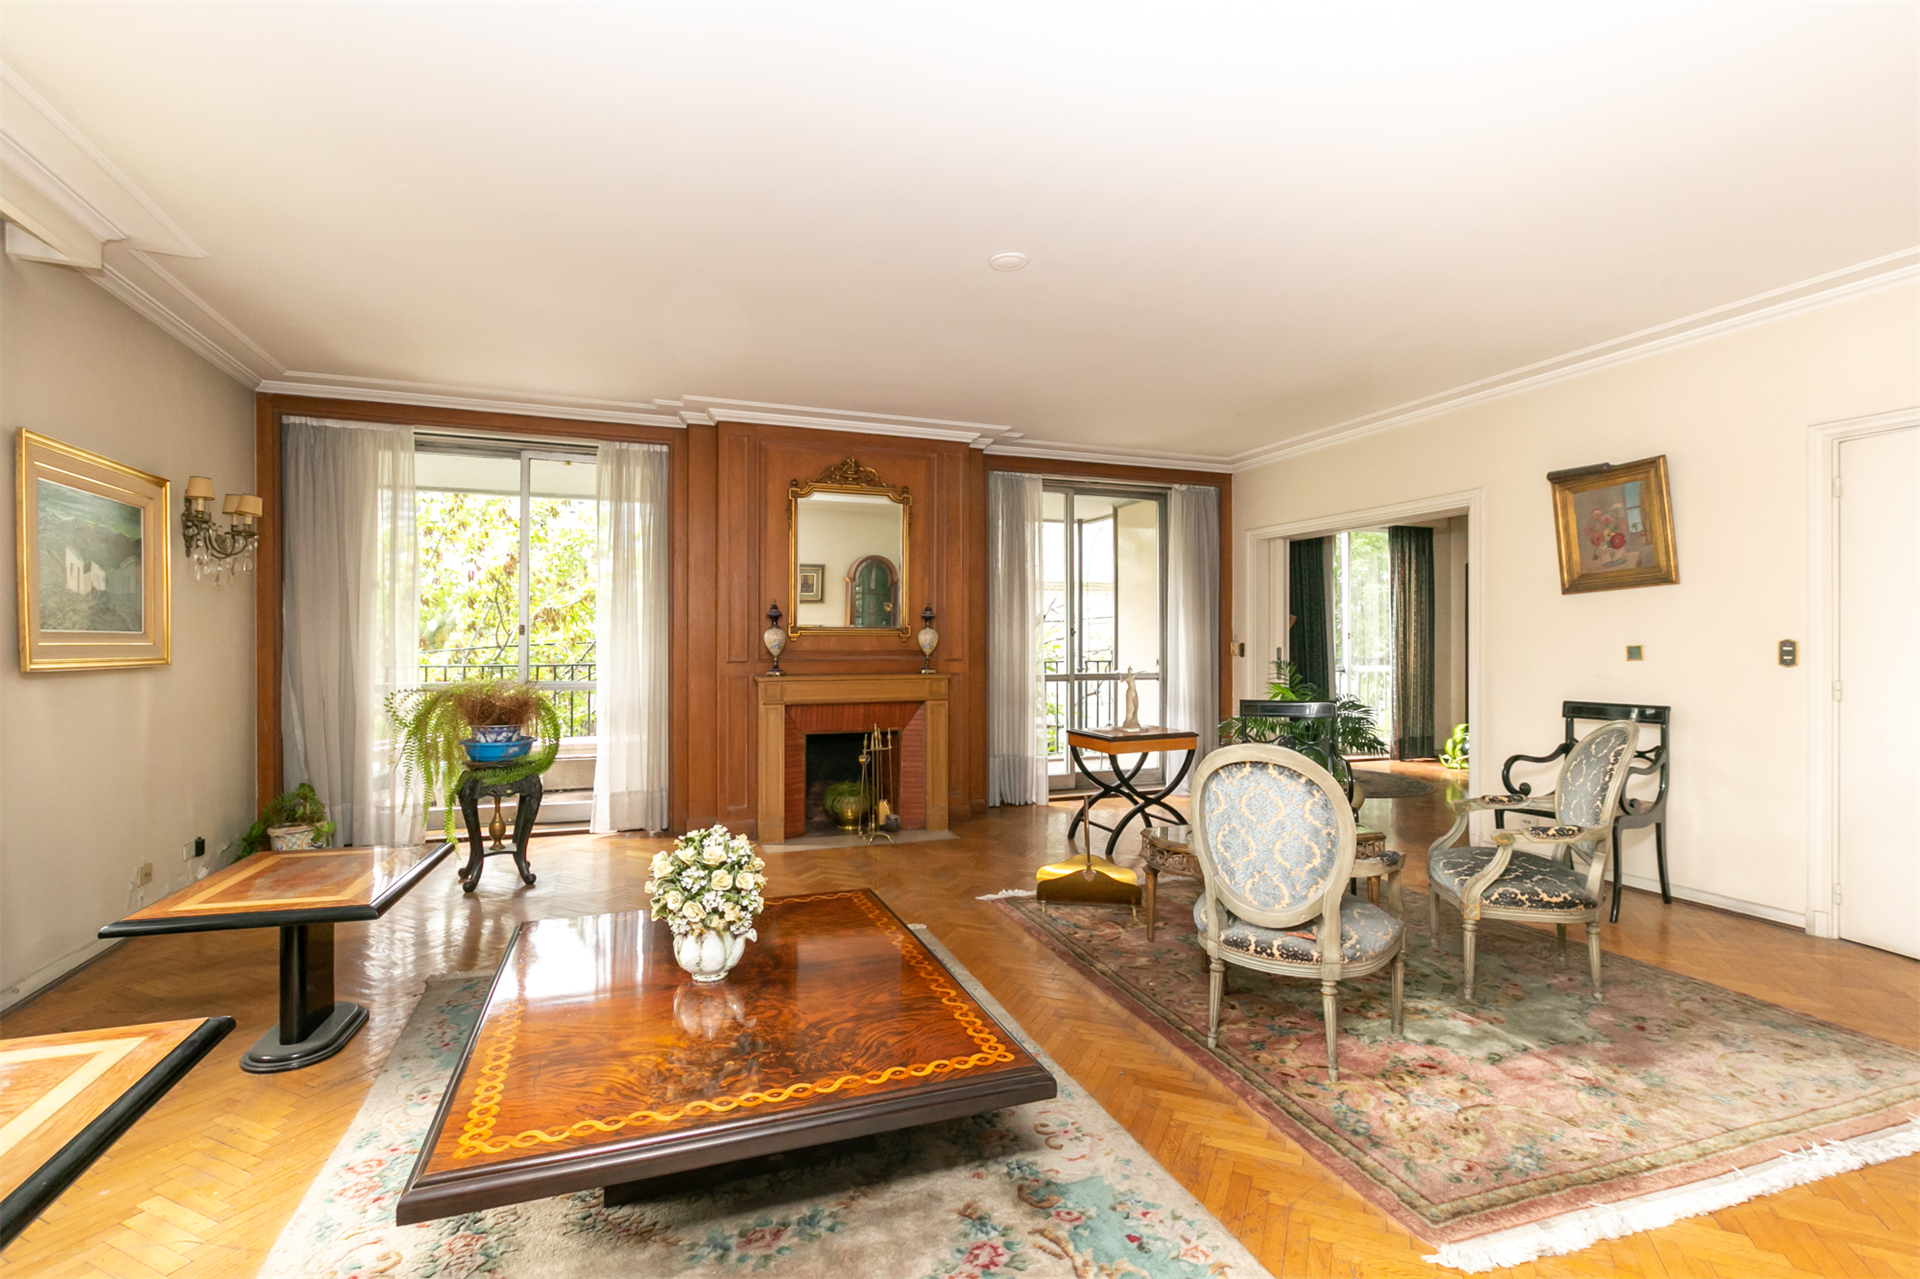 Buenos Aires Luxury Real Estate for Sale Christies International Real Estate